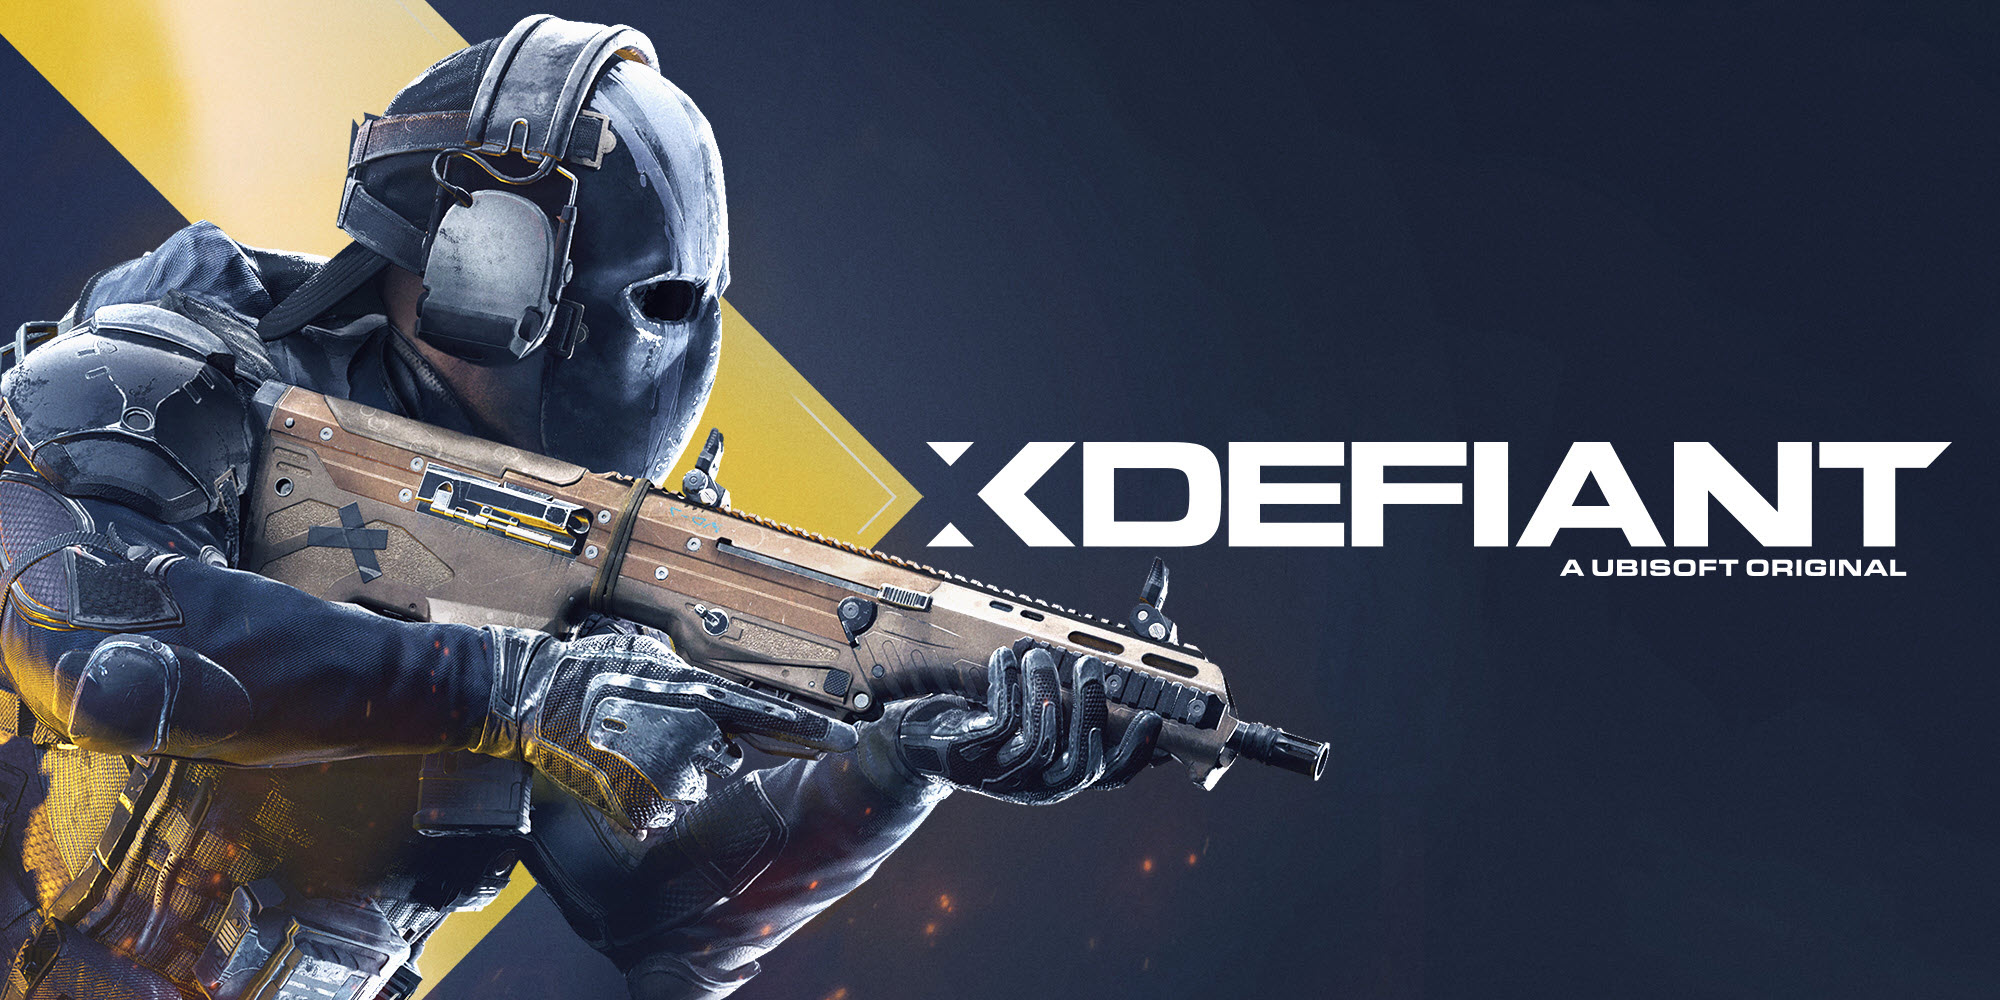 XDefiant hands-on preview: Ubisoft favourites get a frantic new way to play